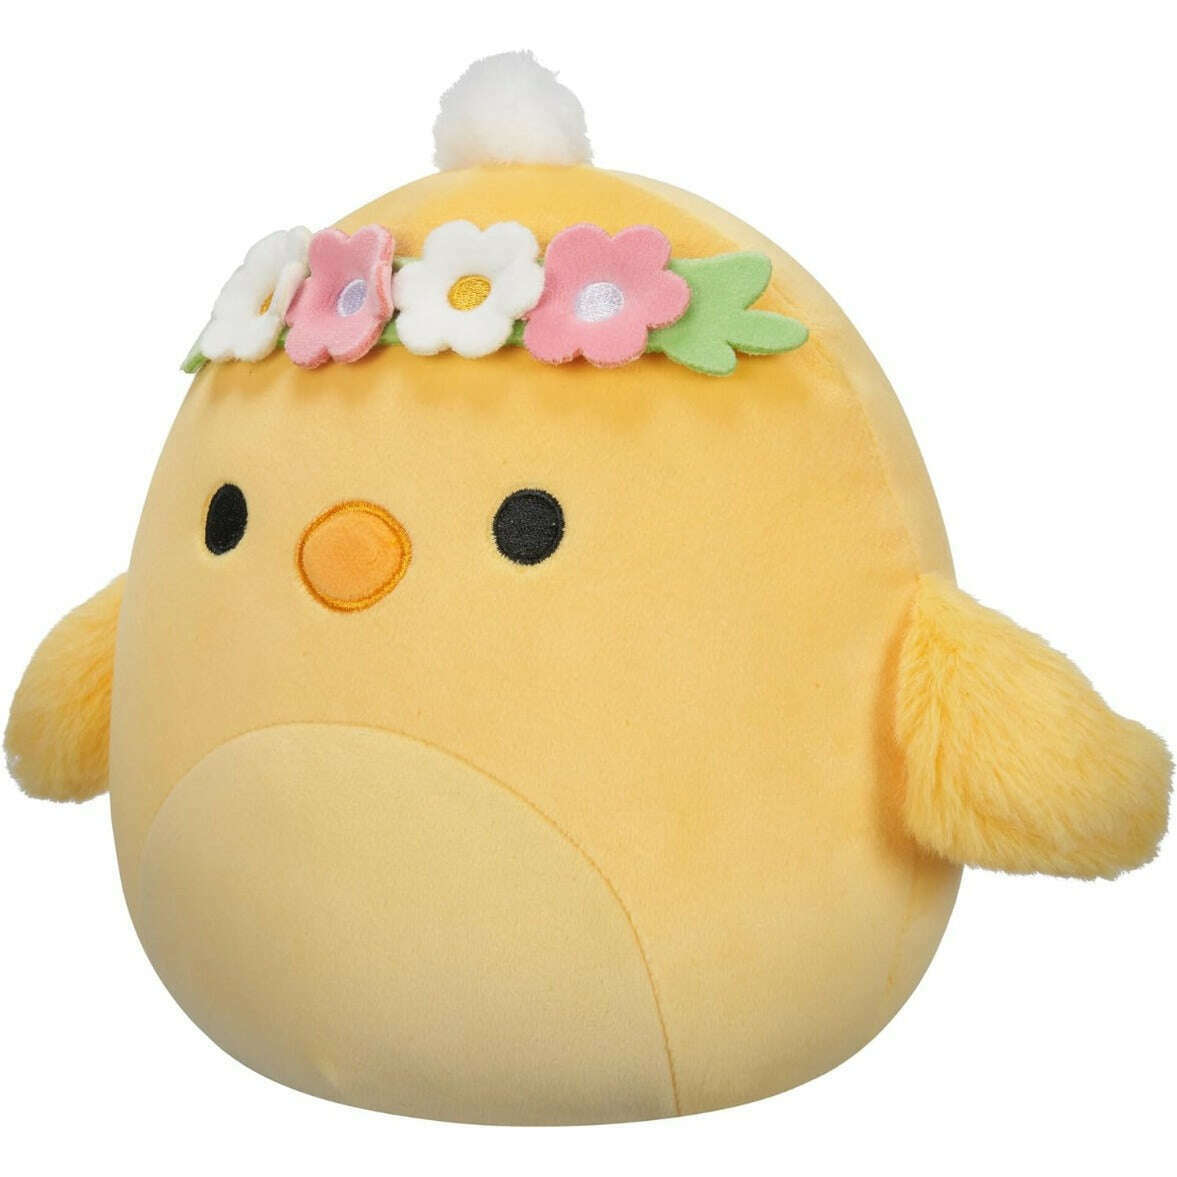 Toys N Tuck:Squishmallows Easter 7.5 Inch Plush - Triston The Chick,Squishmallows